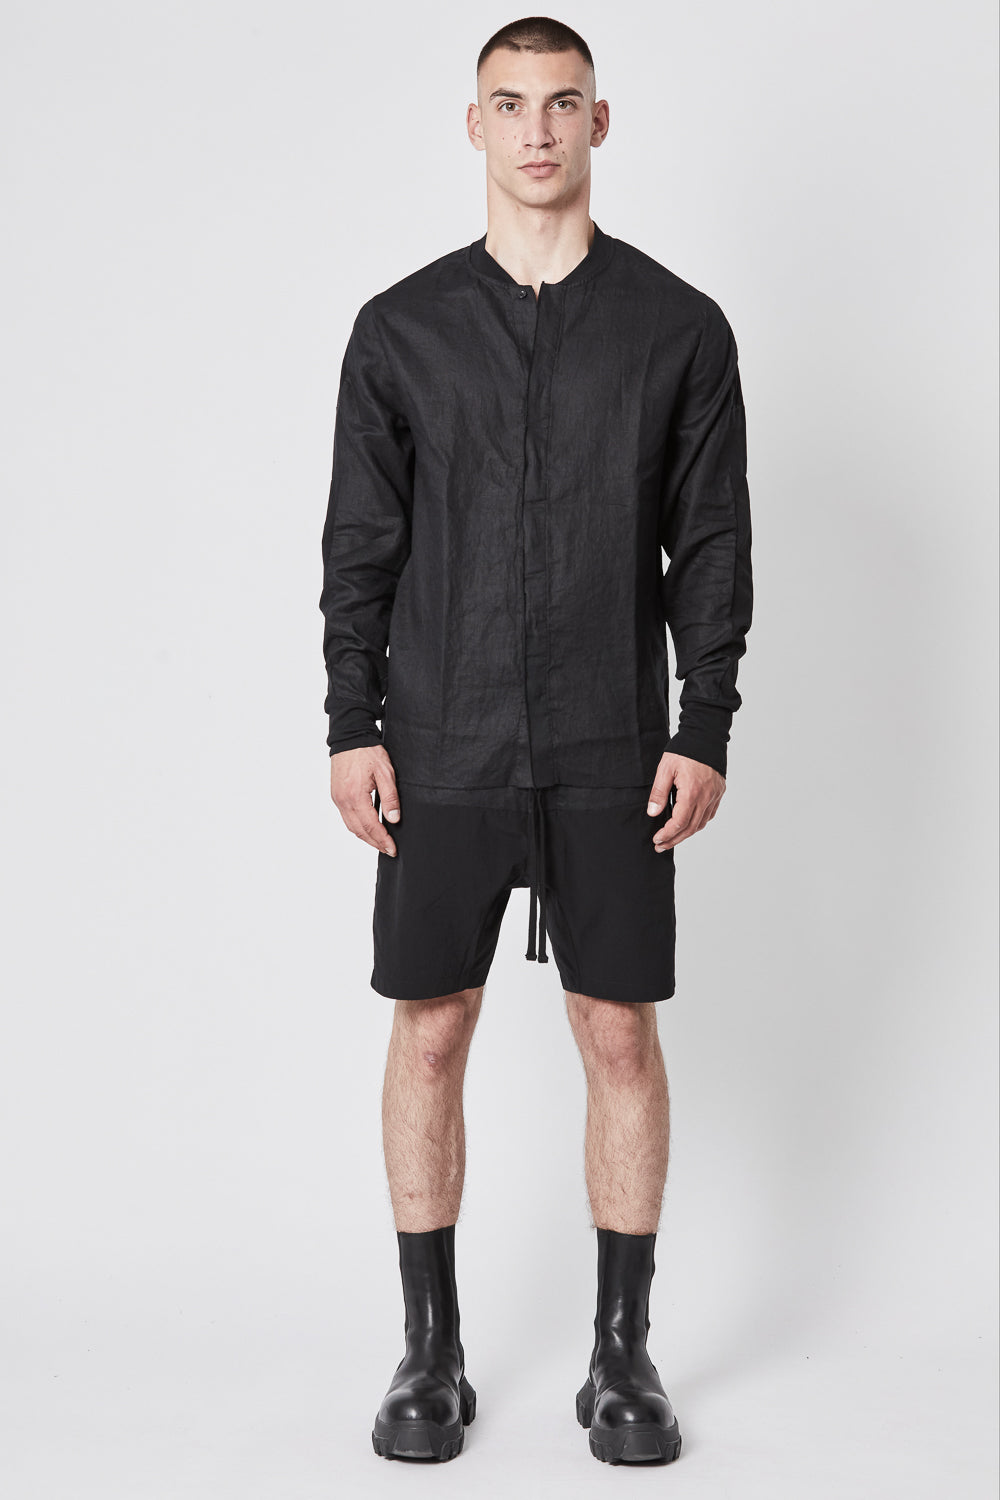 Buy the Thom Krom M H 134 Shirt in Black at Intro. Spend £50 for free UK delivery. Official stockists. We ship worldwide.